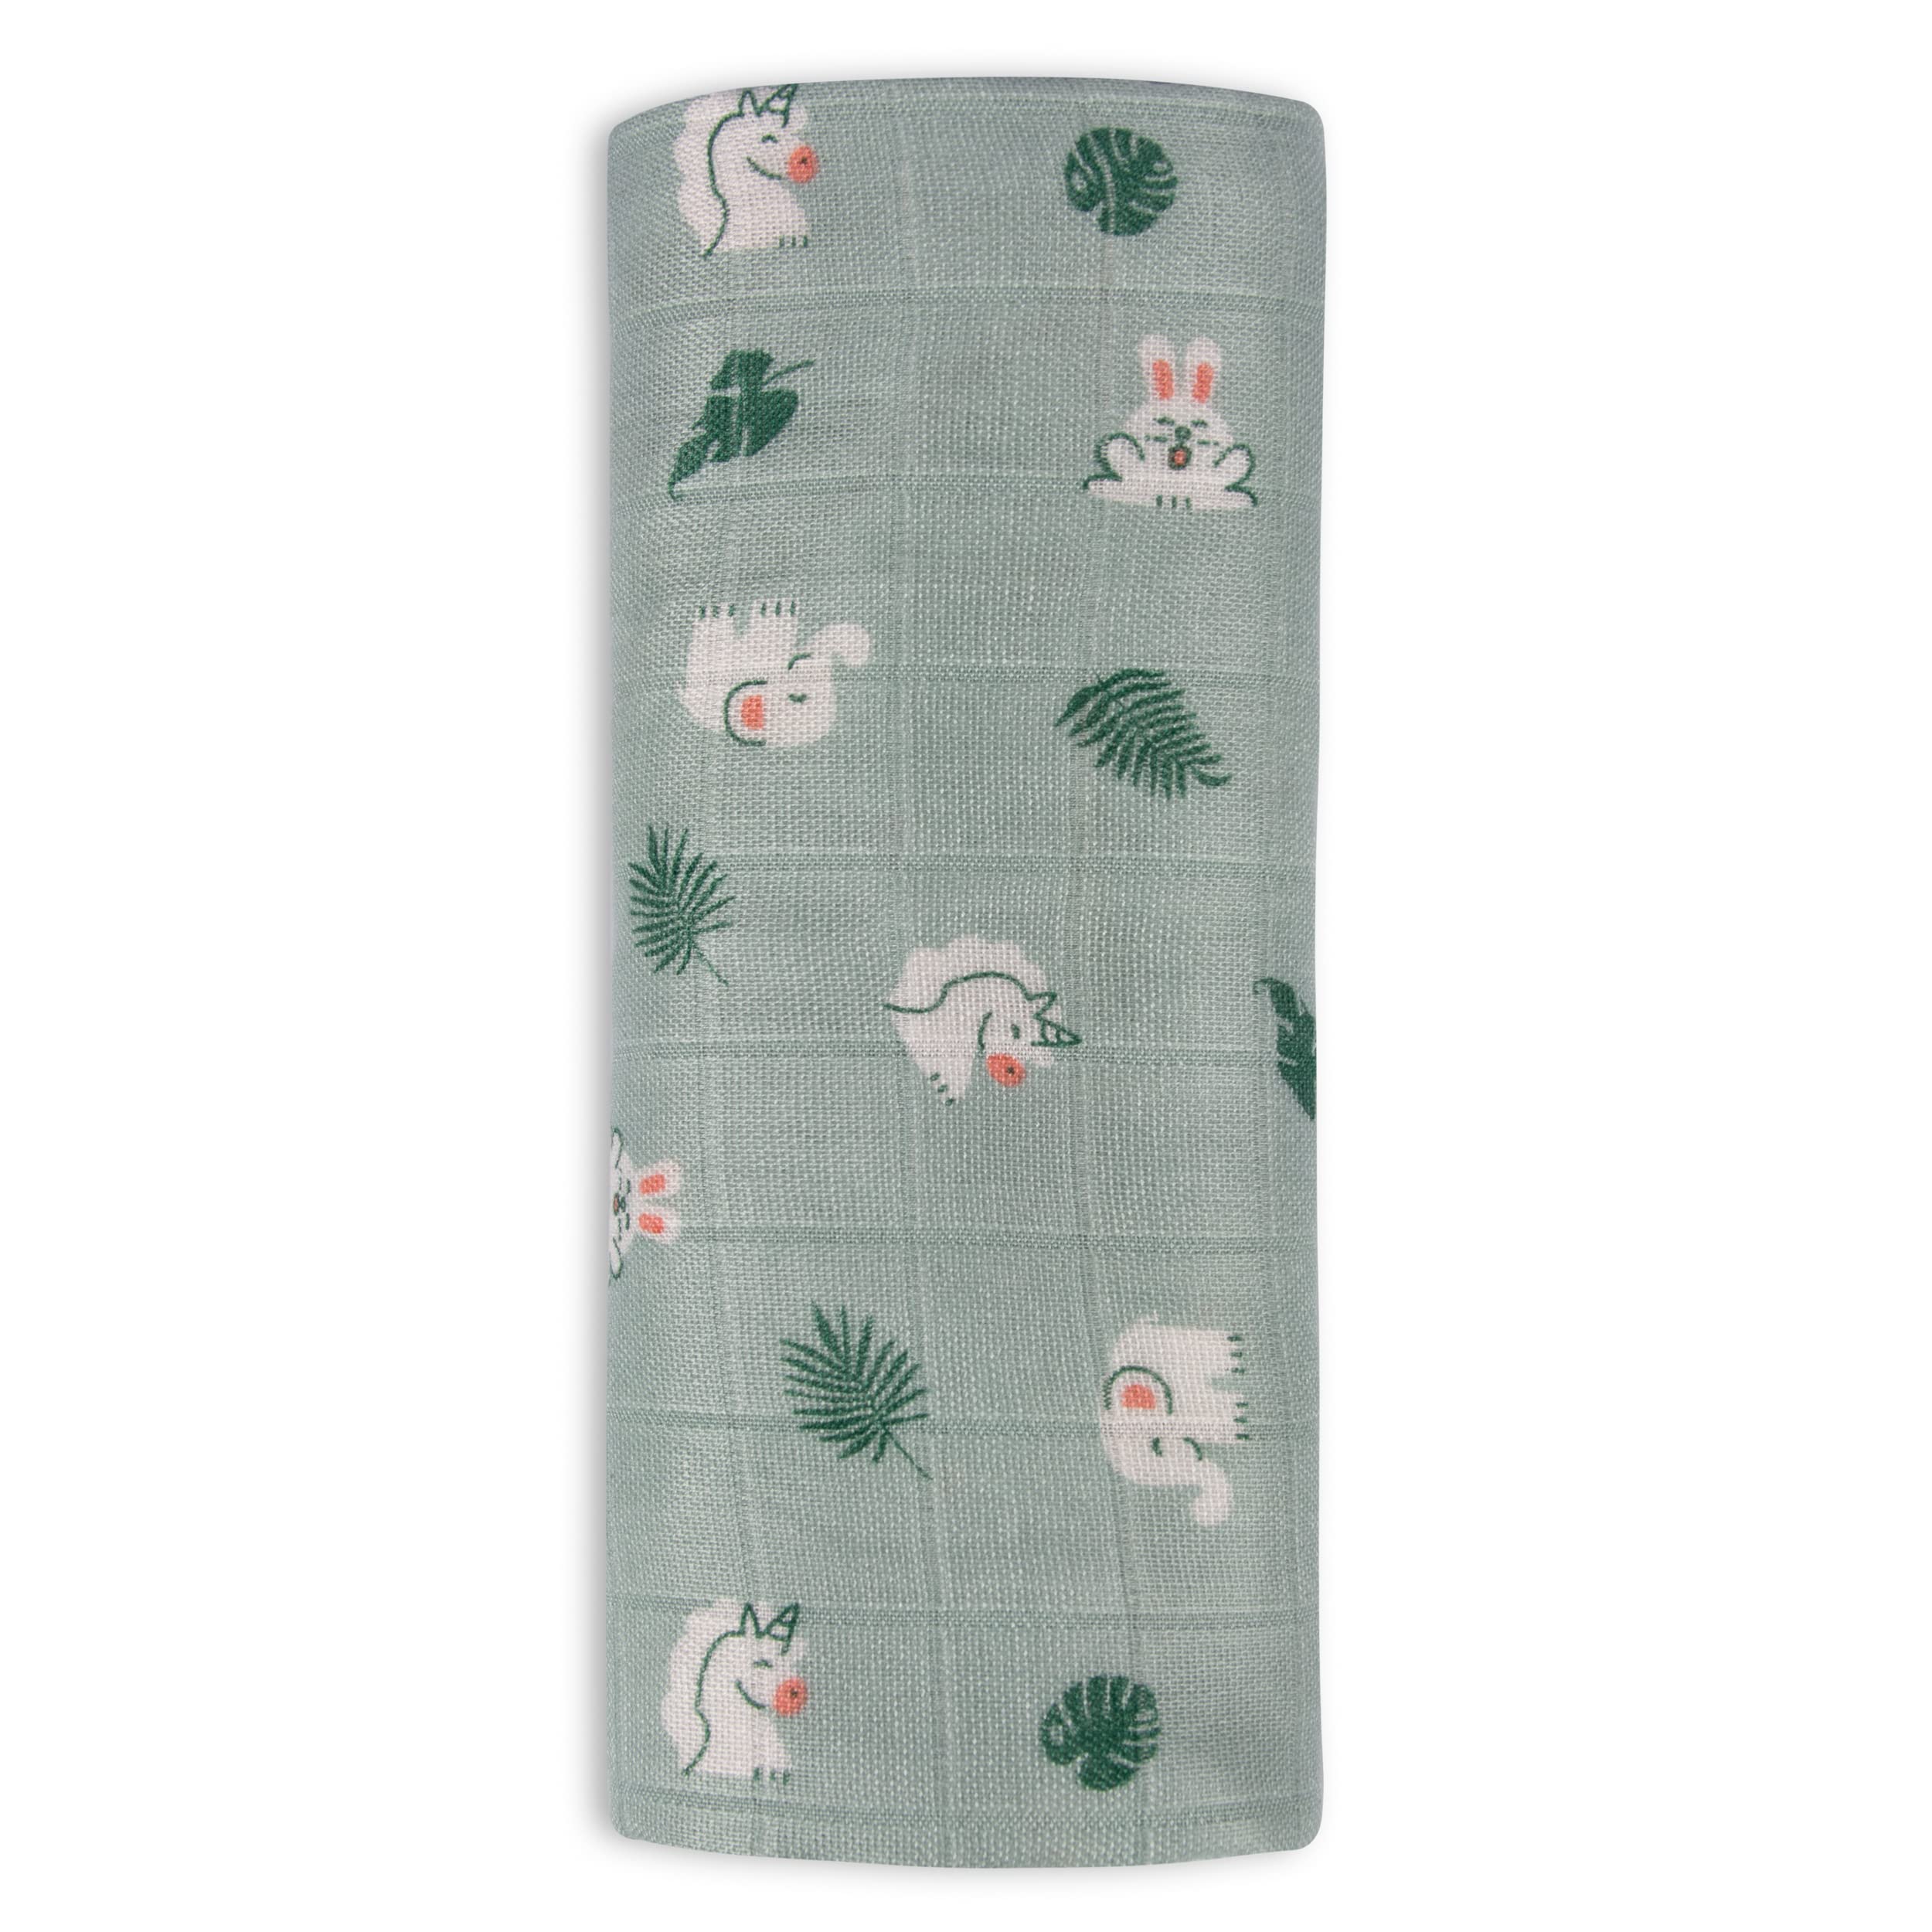 Mush 100% Bamboo Swaddle : Ultra Soft, Breathable, Thermoregulating, Absorbent, Light Weight and Multipurpose Bamboo Wrapper/Baby Bath Towel/Blanket (2, Jungle Color - Rabbit Green)